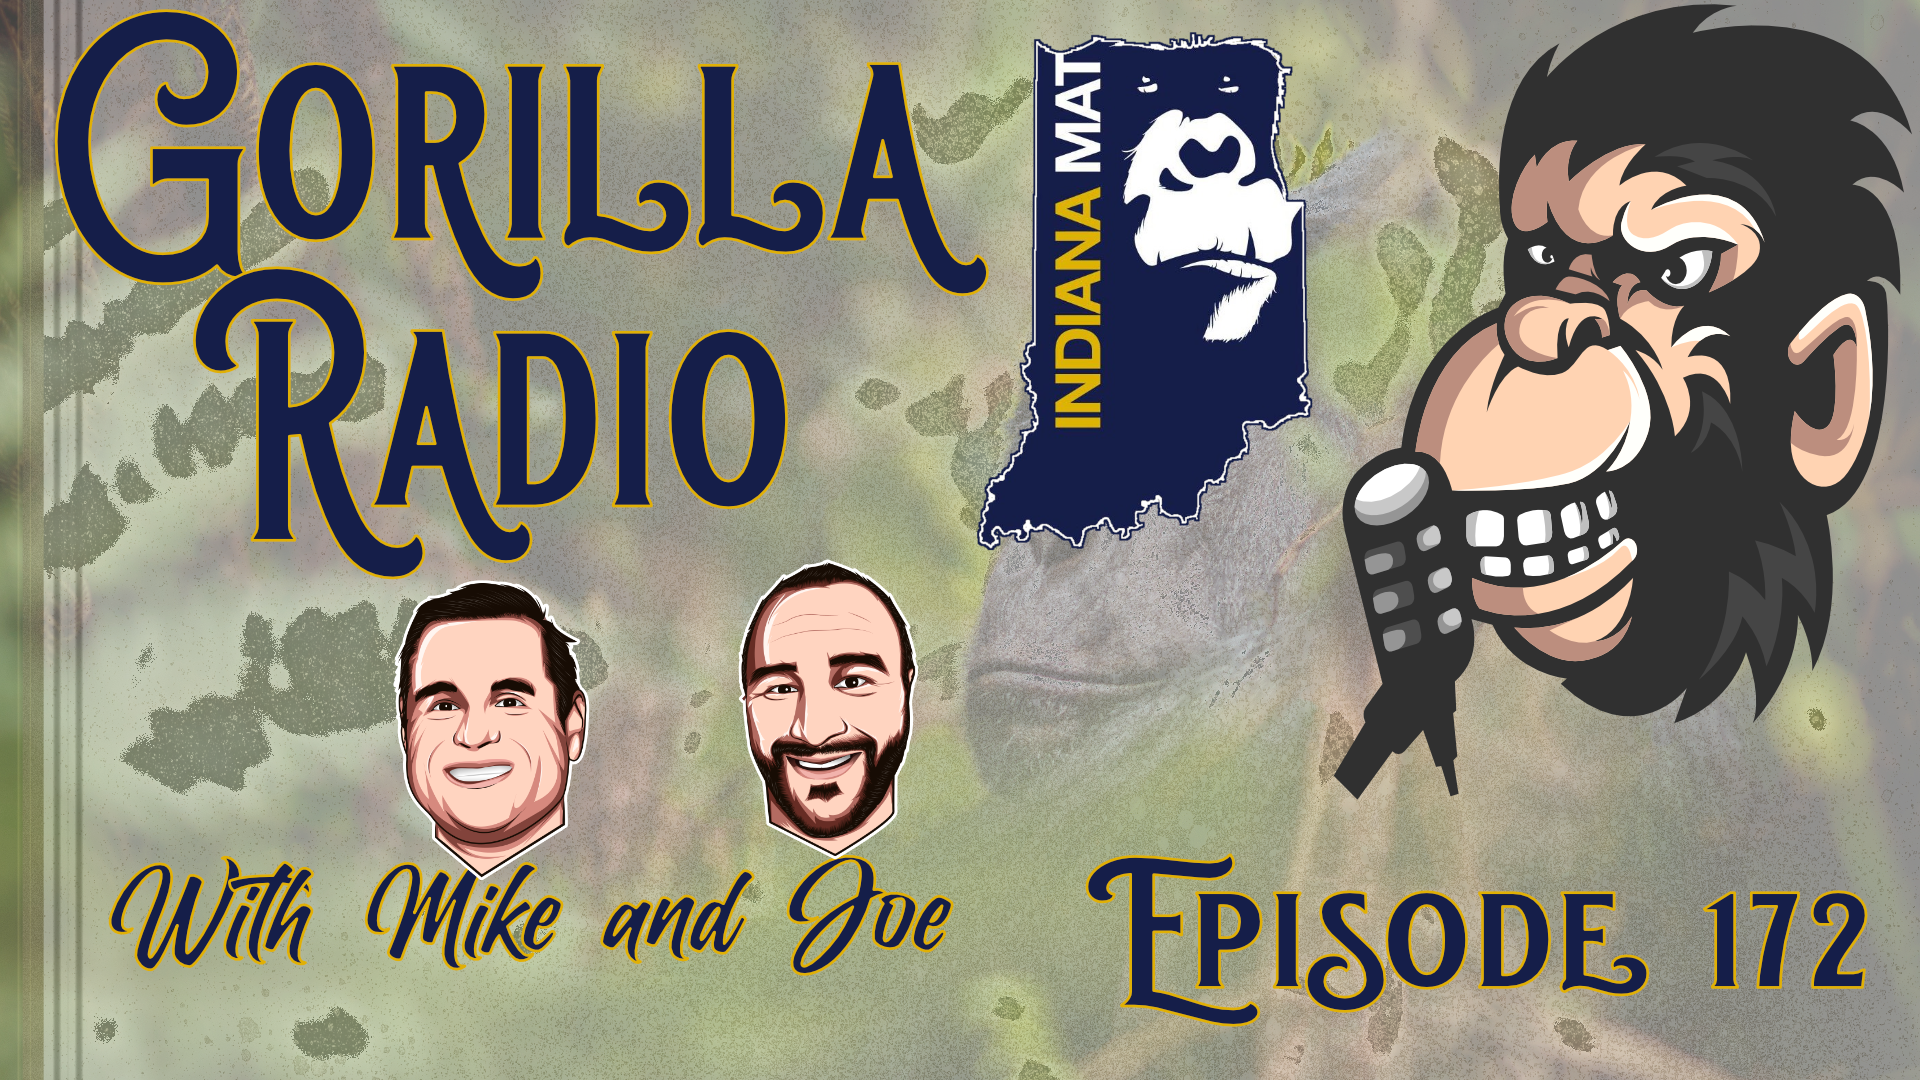 More information about "IndianaMat Gorilla Radio Episode 174- New Castle Semi-State"